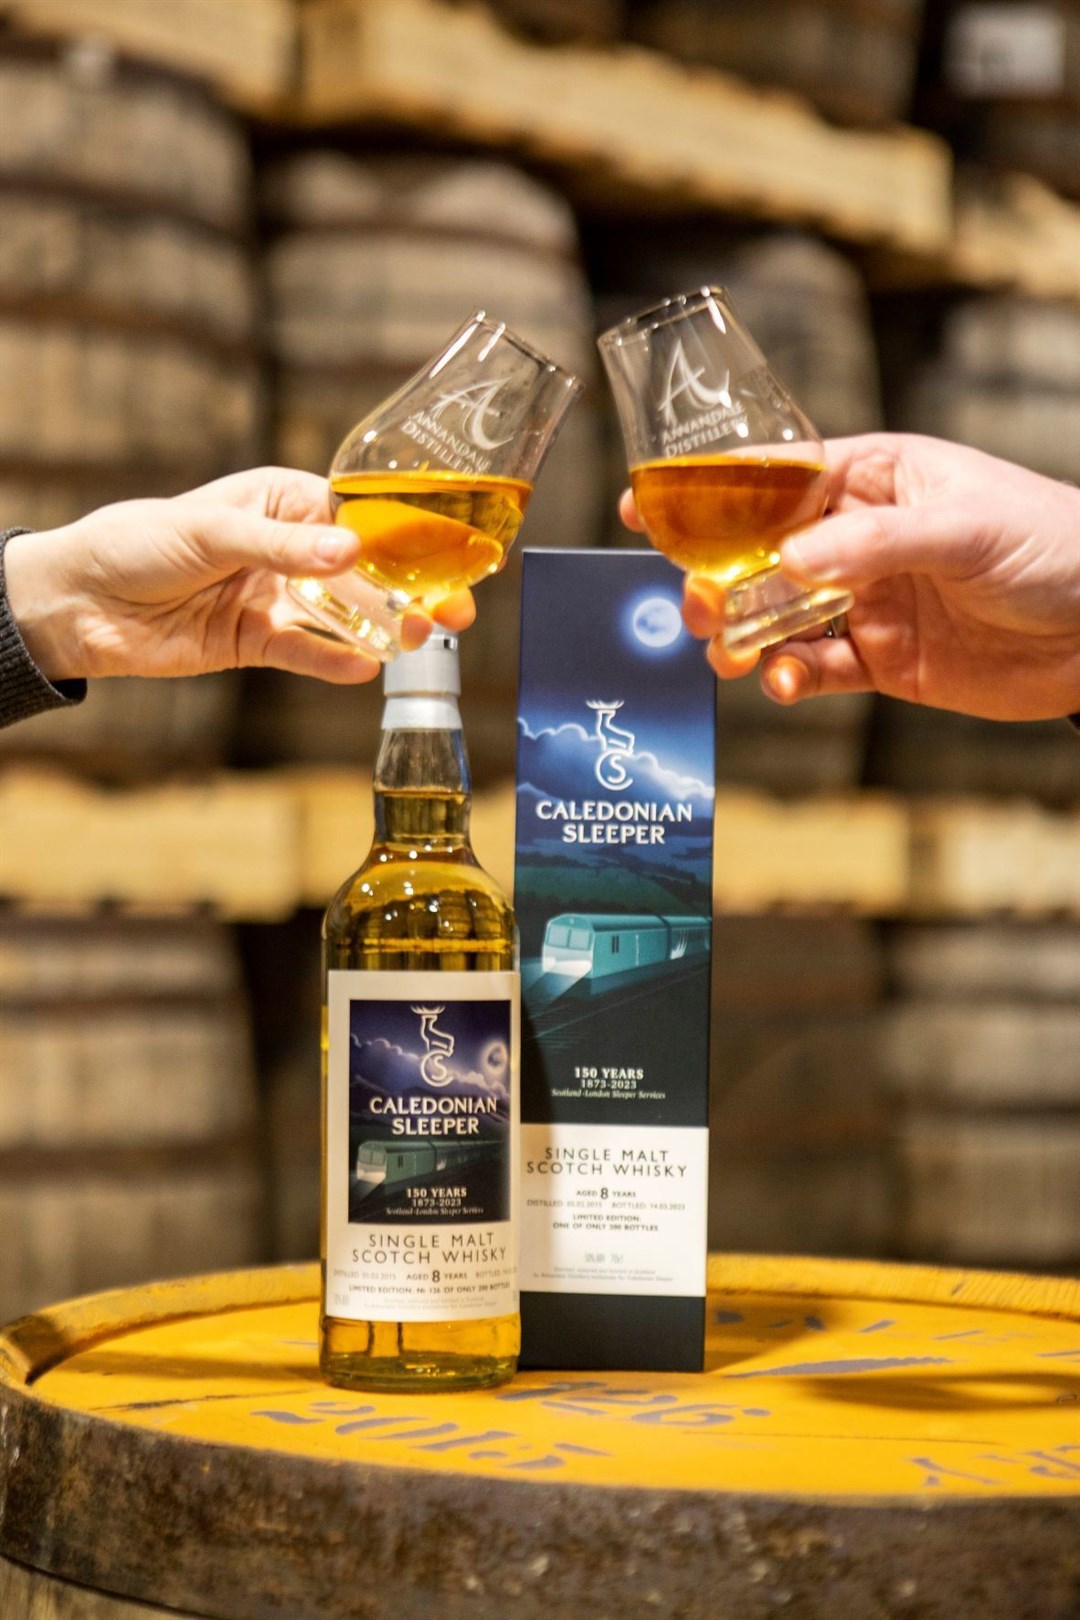 The limited edition single malt Caledonian Sleeper whisky. Picture: Allan Devlin - South West Images.